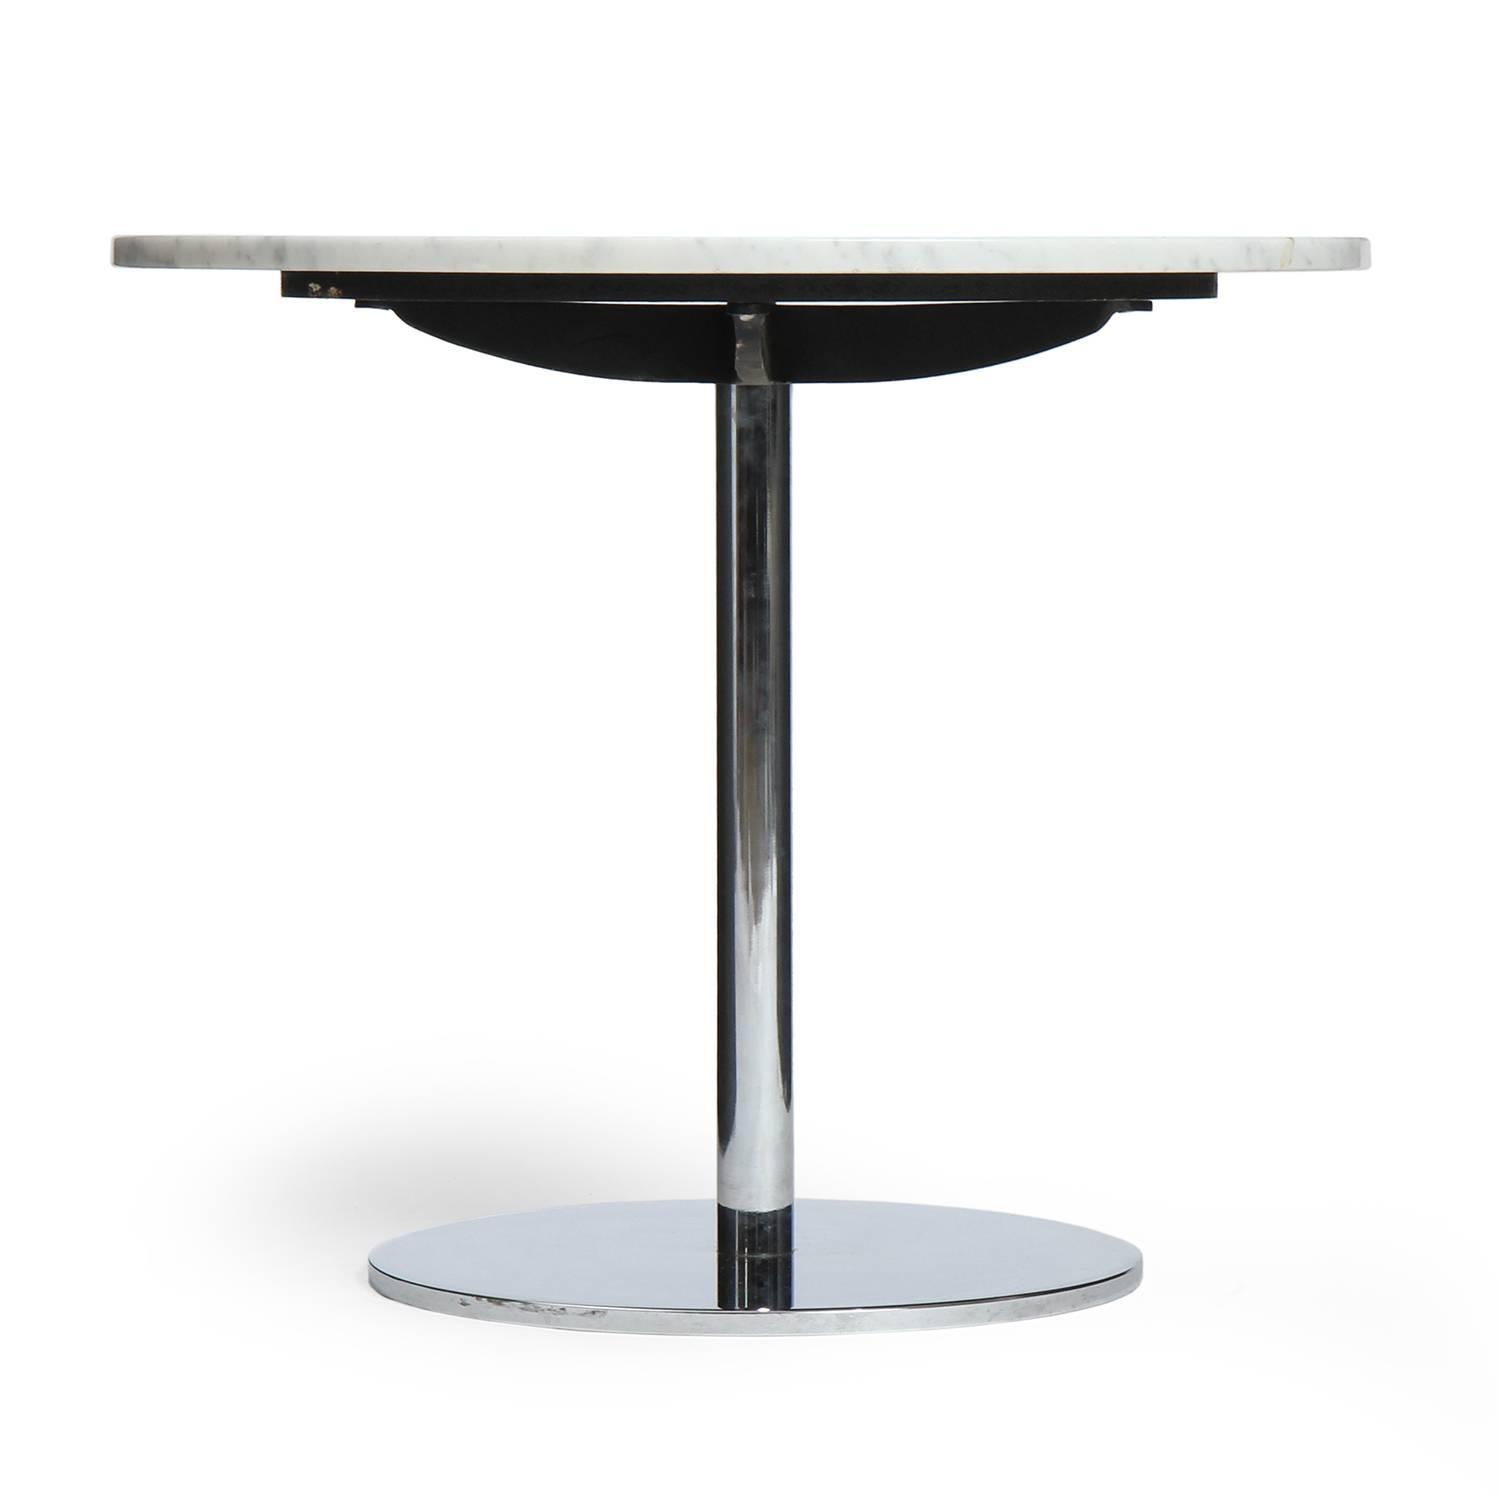 A minimalist and finely crafted occasional table having a heavy chromed steel base supporting a floating round figured marble top.